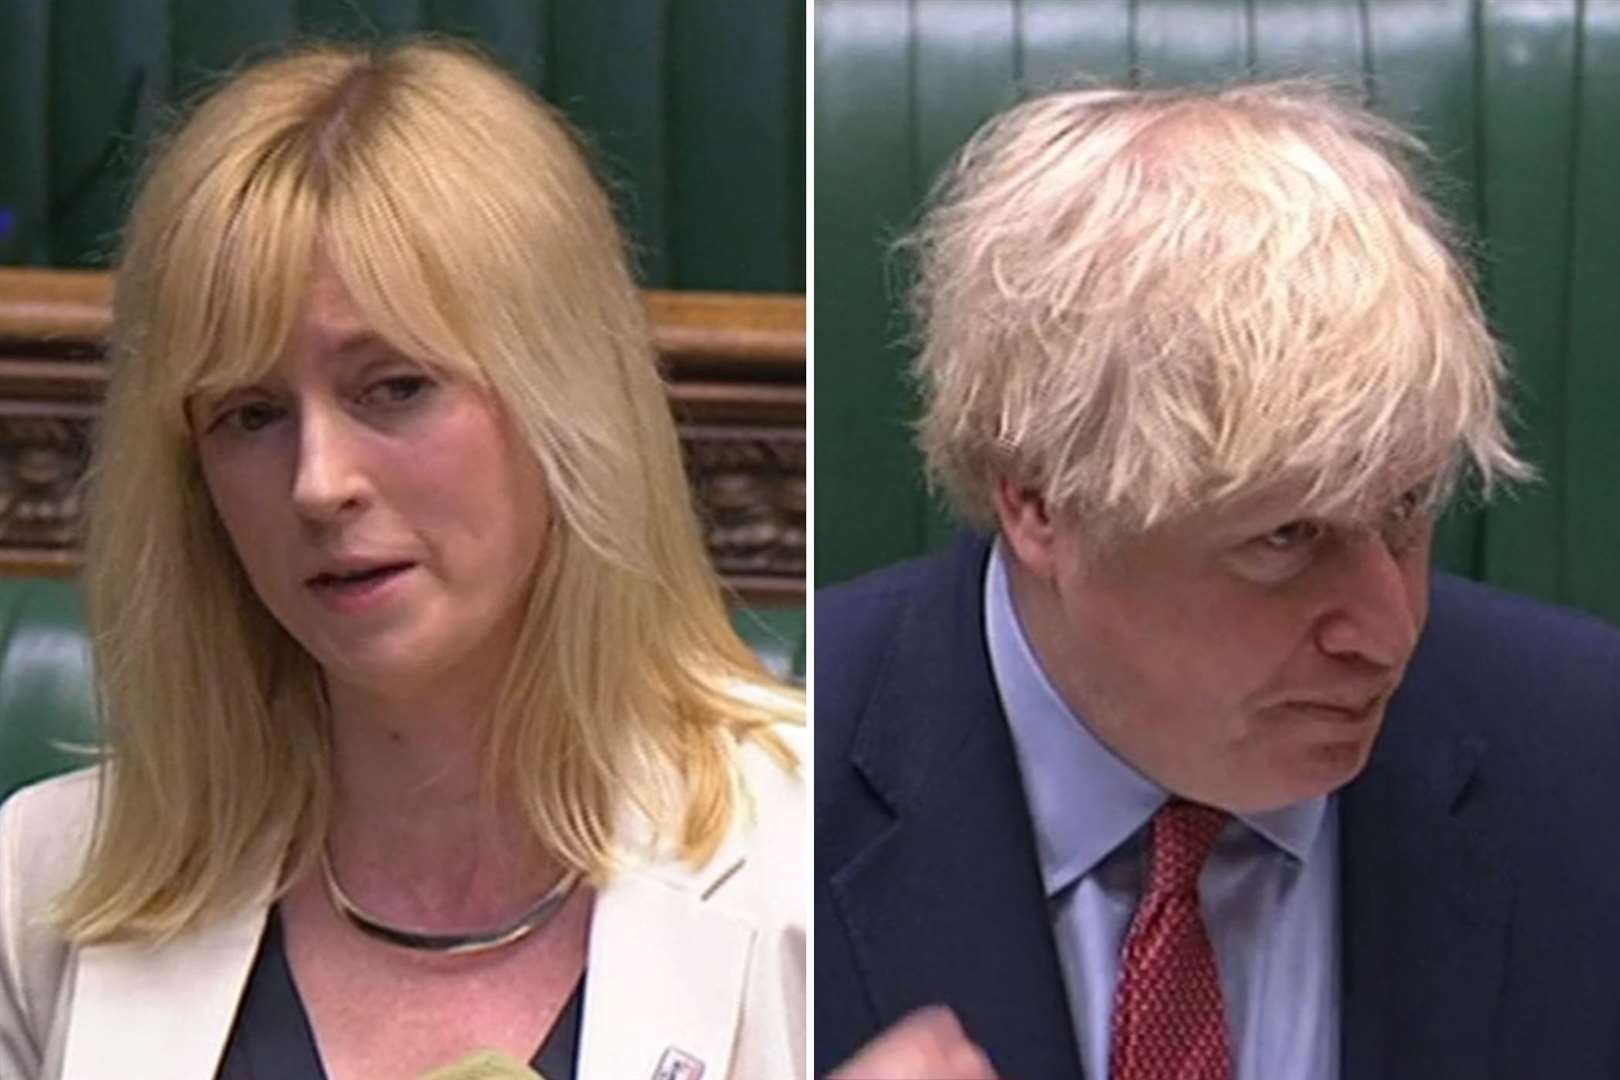 MP Rosie Duffield addressed Prime Minister Boris Johnson in Parliament today